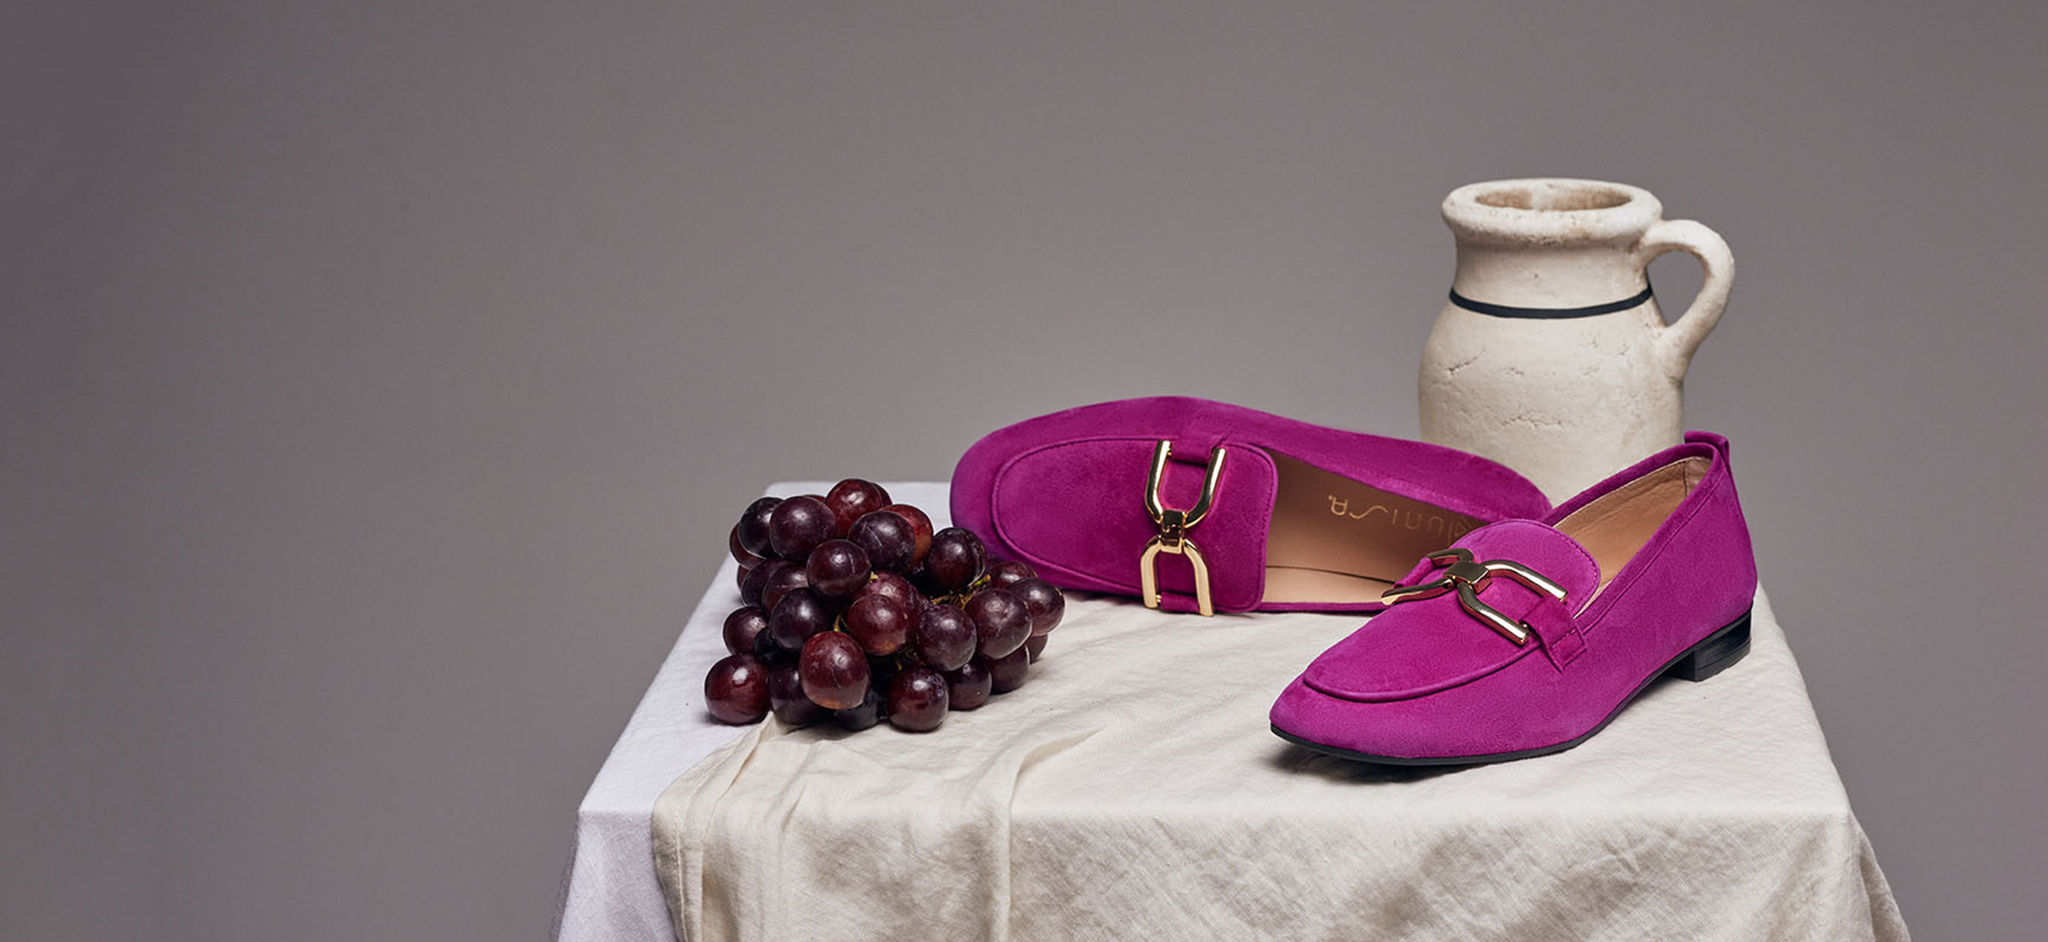 Unisa – Spanish Passion for Shoes | Official Online Shop & Stockists in  Australia